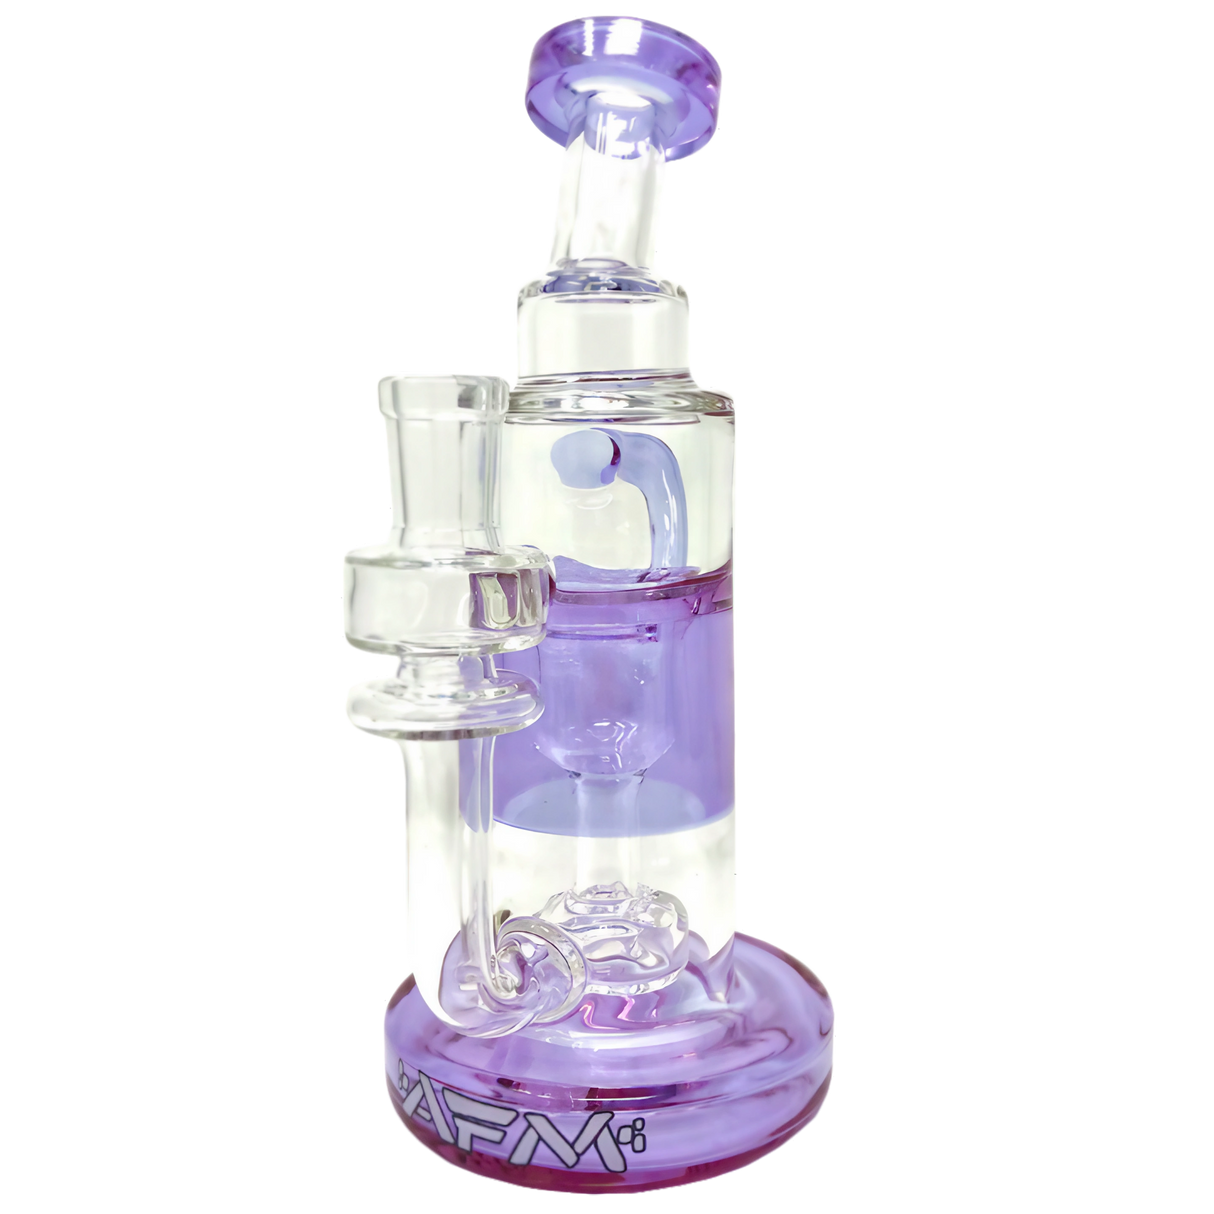 AFM Glass Power Incycler 8.5" with Slit-Diffuser Percolator and Recycler Design, Front View